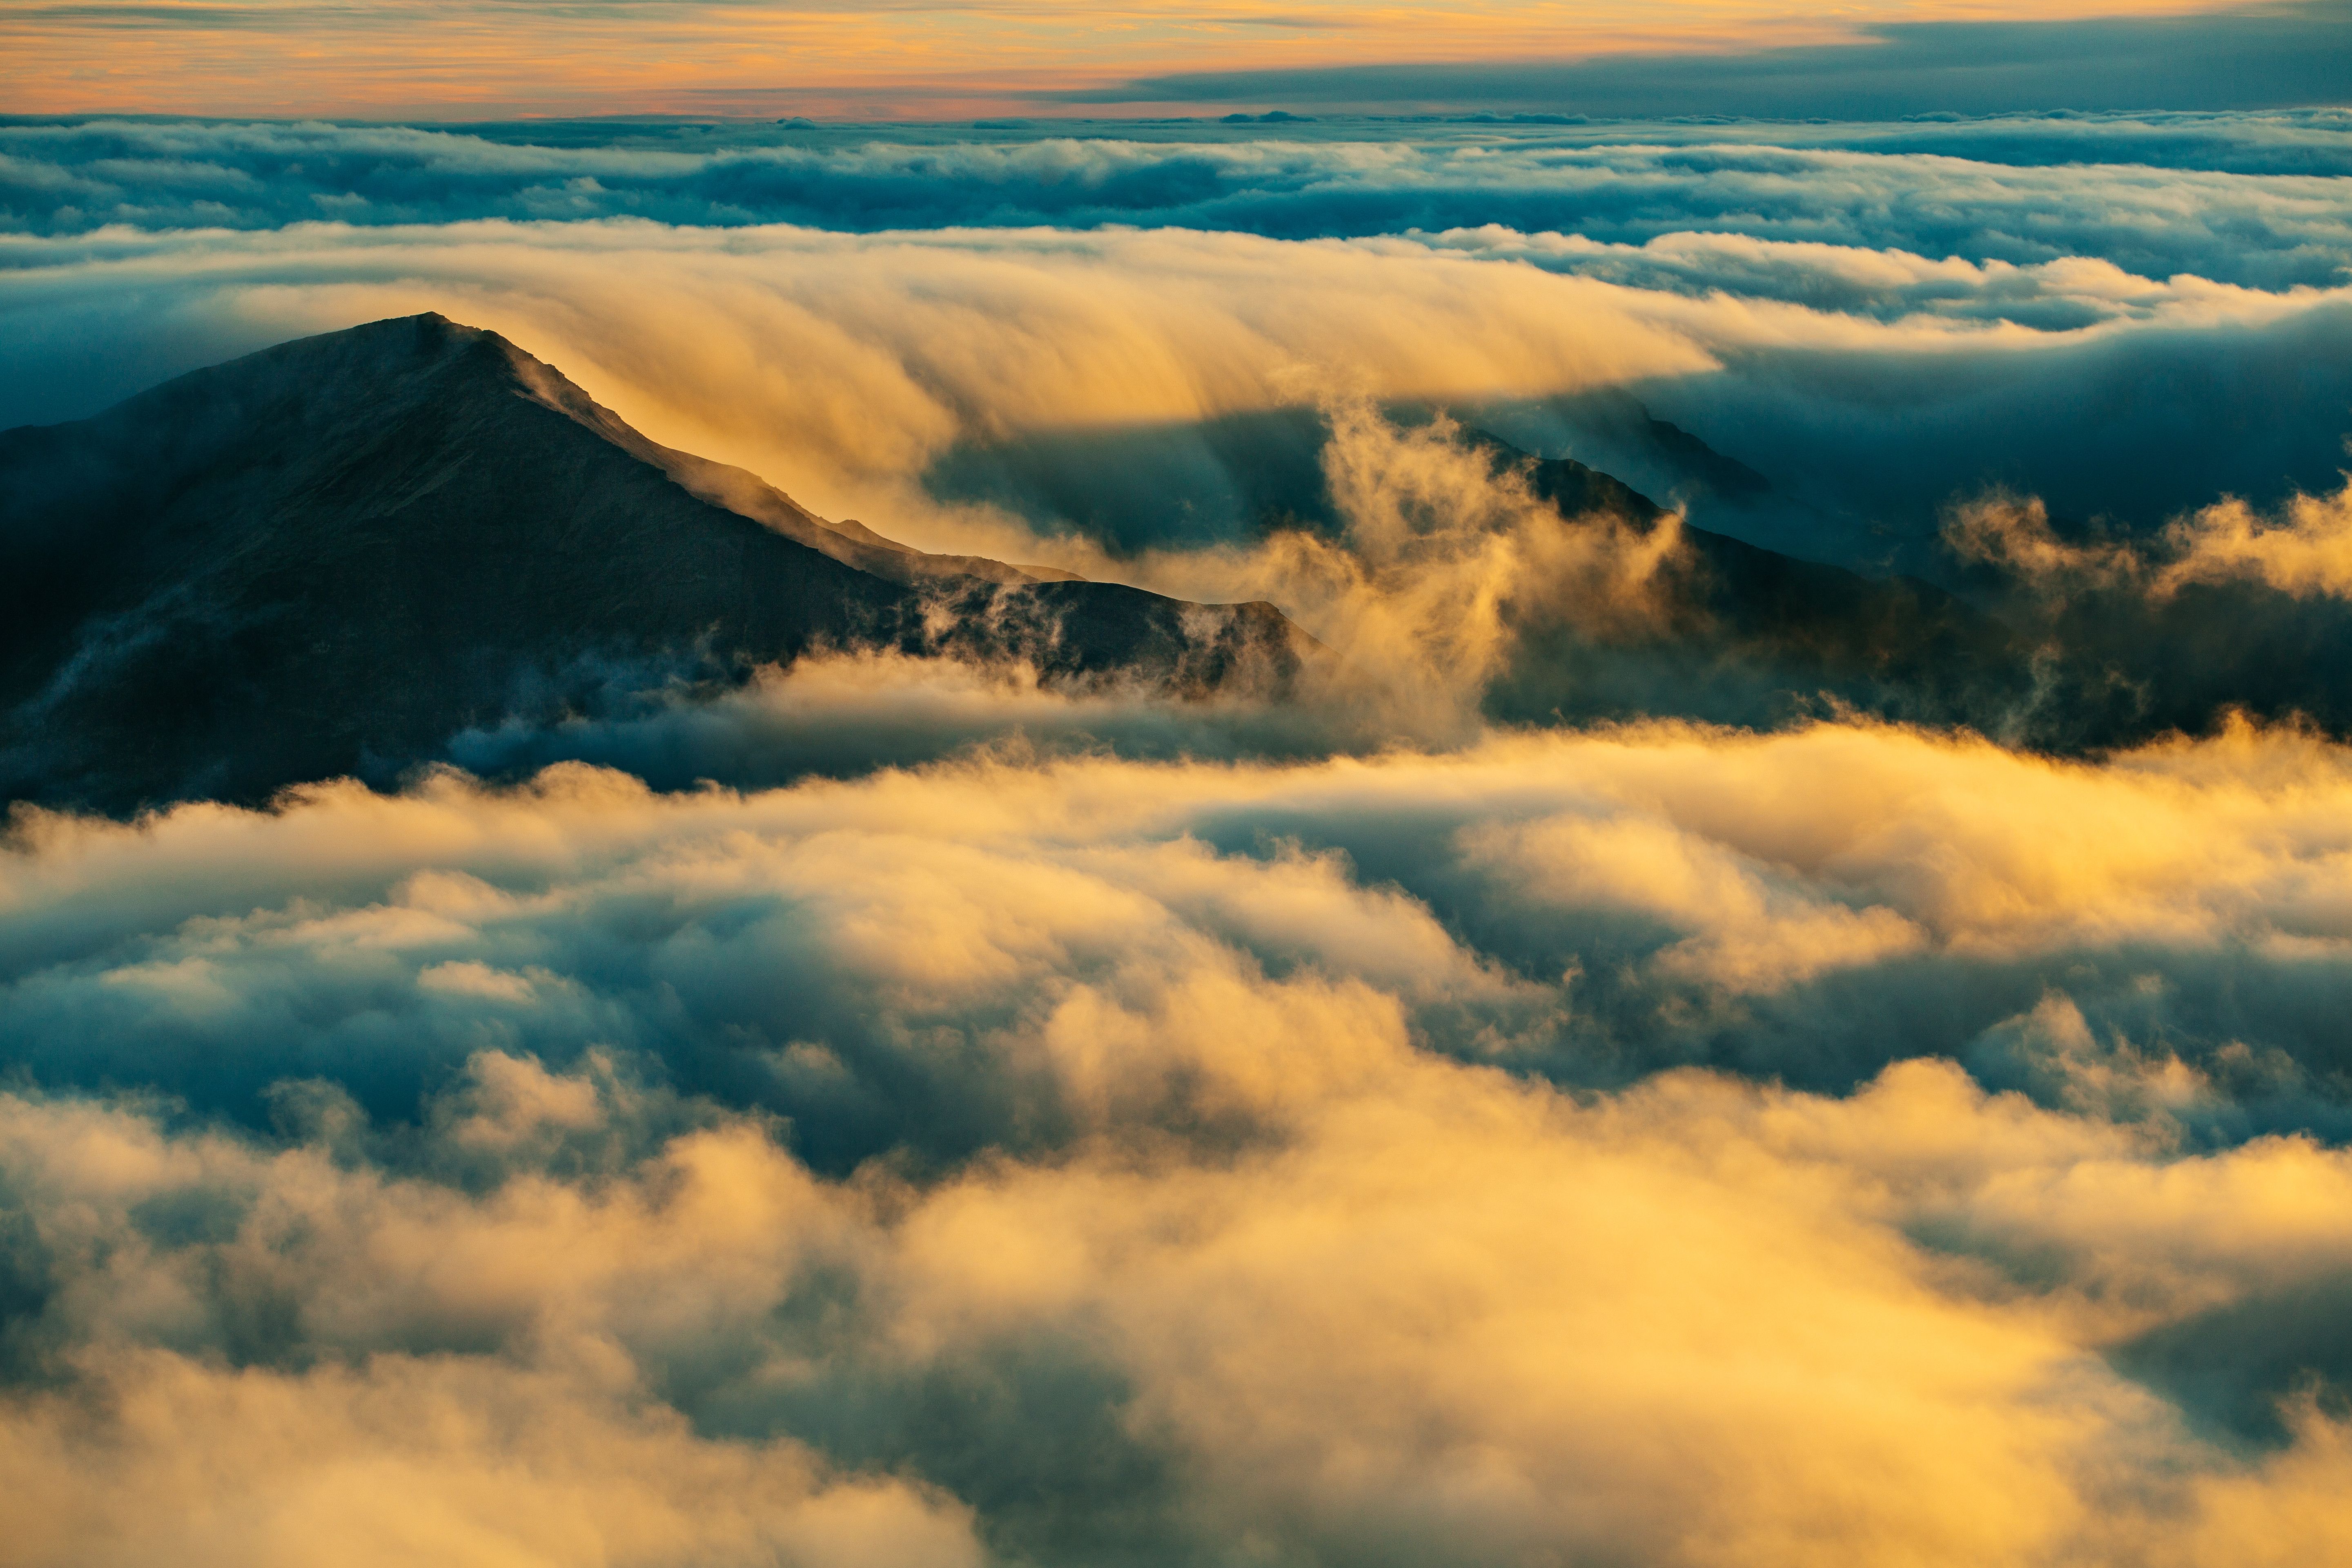 A mountain is surrounded by clouds and fog - Landscape